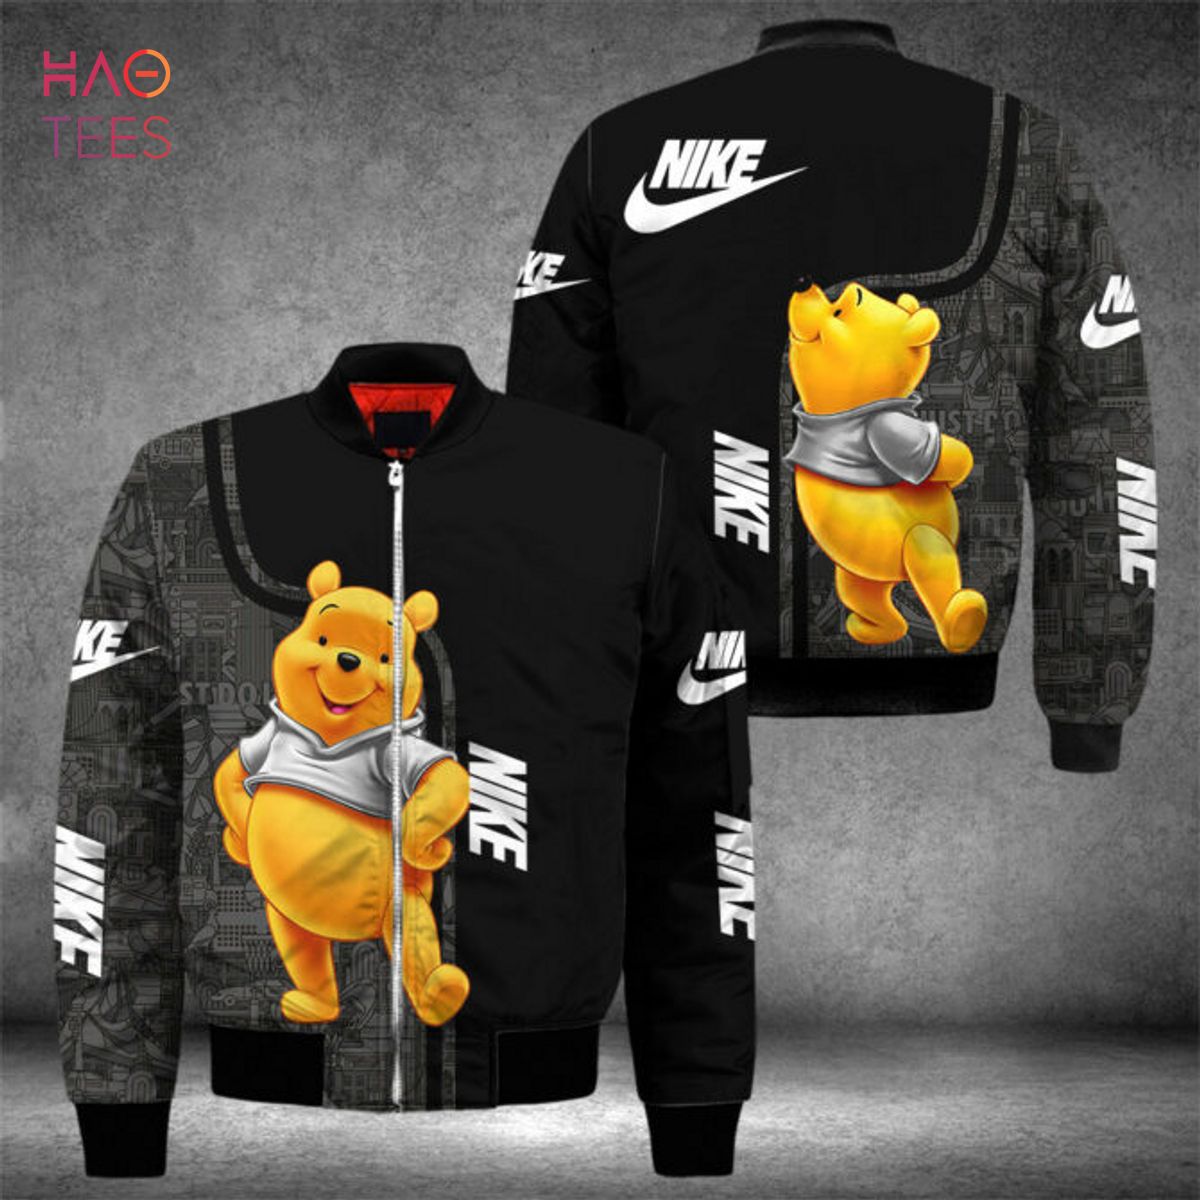 AVAILABLE Nike Luxury Brand Winnie The Pooh Bomber Jacket Limited Edition